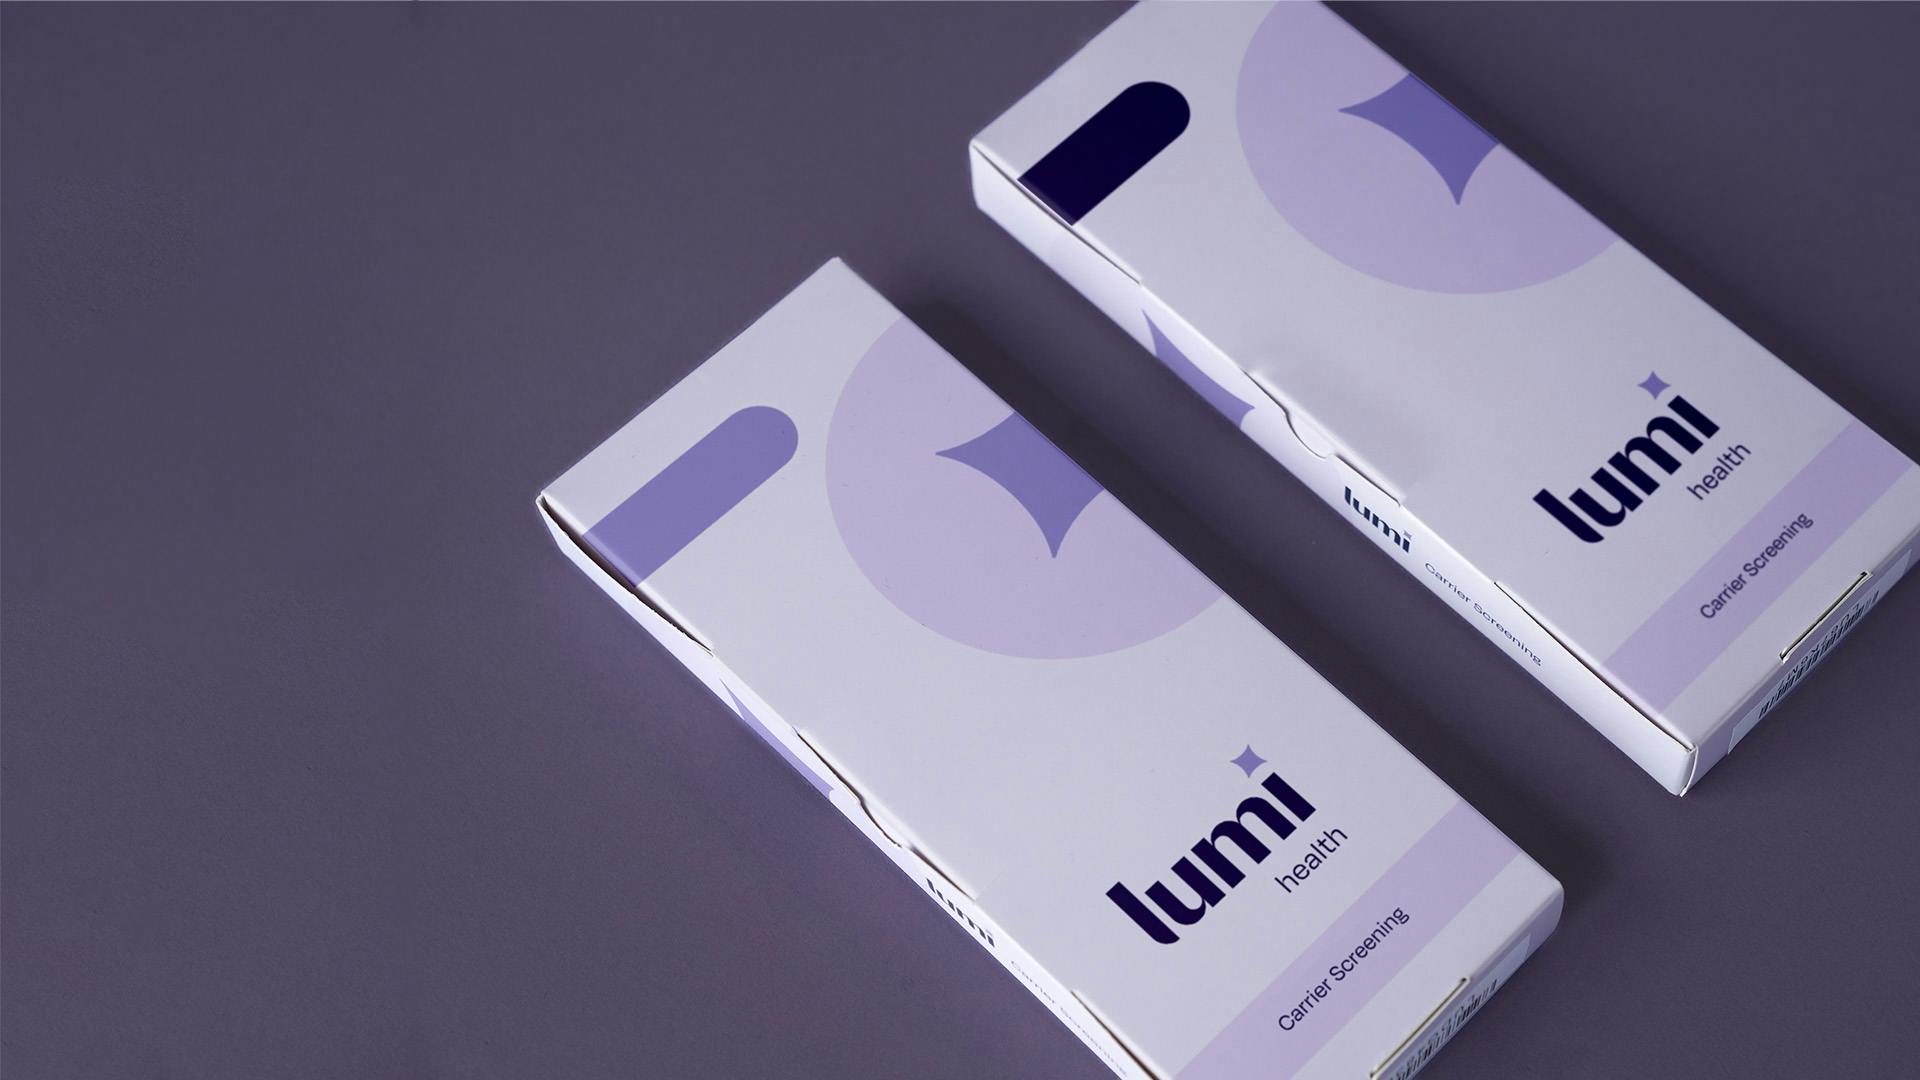 A comparison of 2 Lumi kits on a violet surface